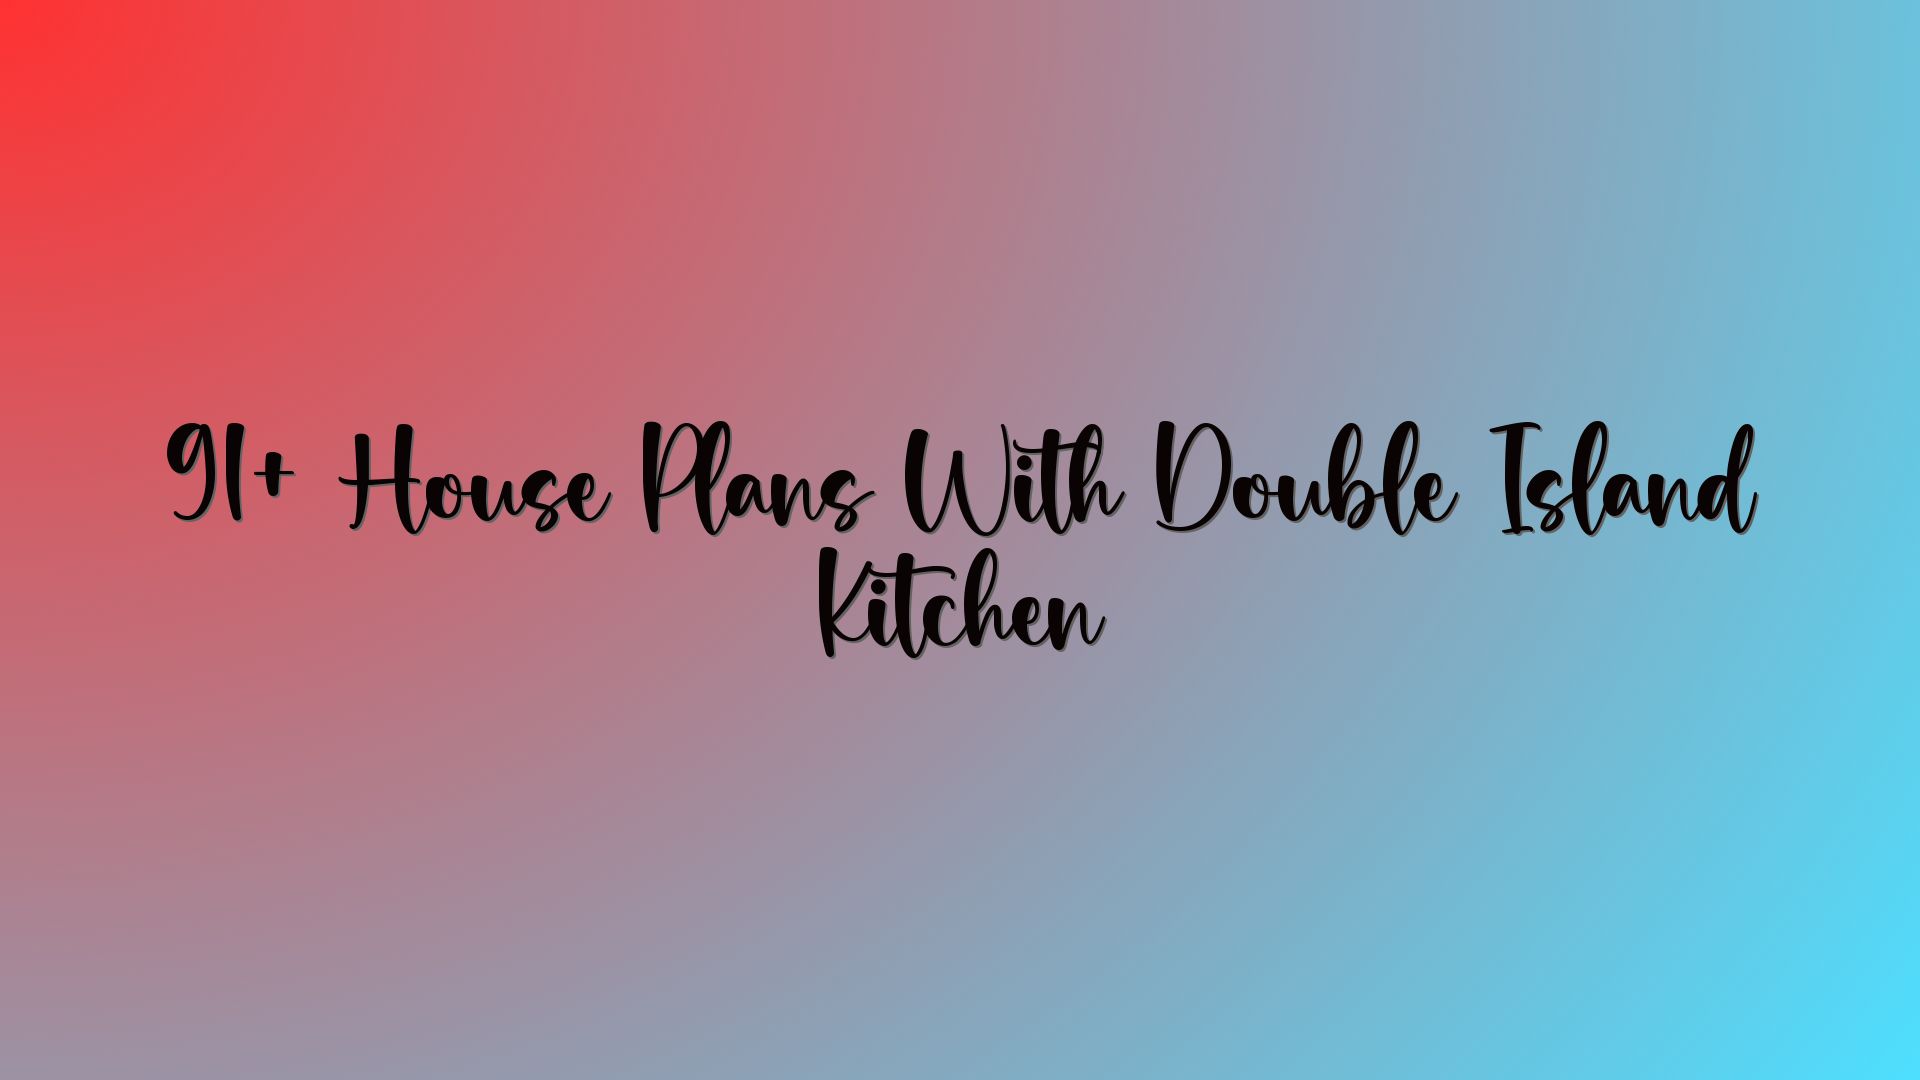 91+ House Plans With Double Island Kitchen